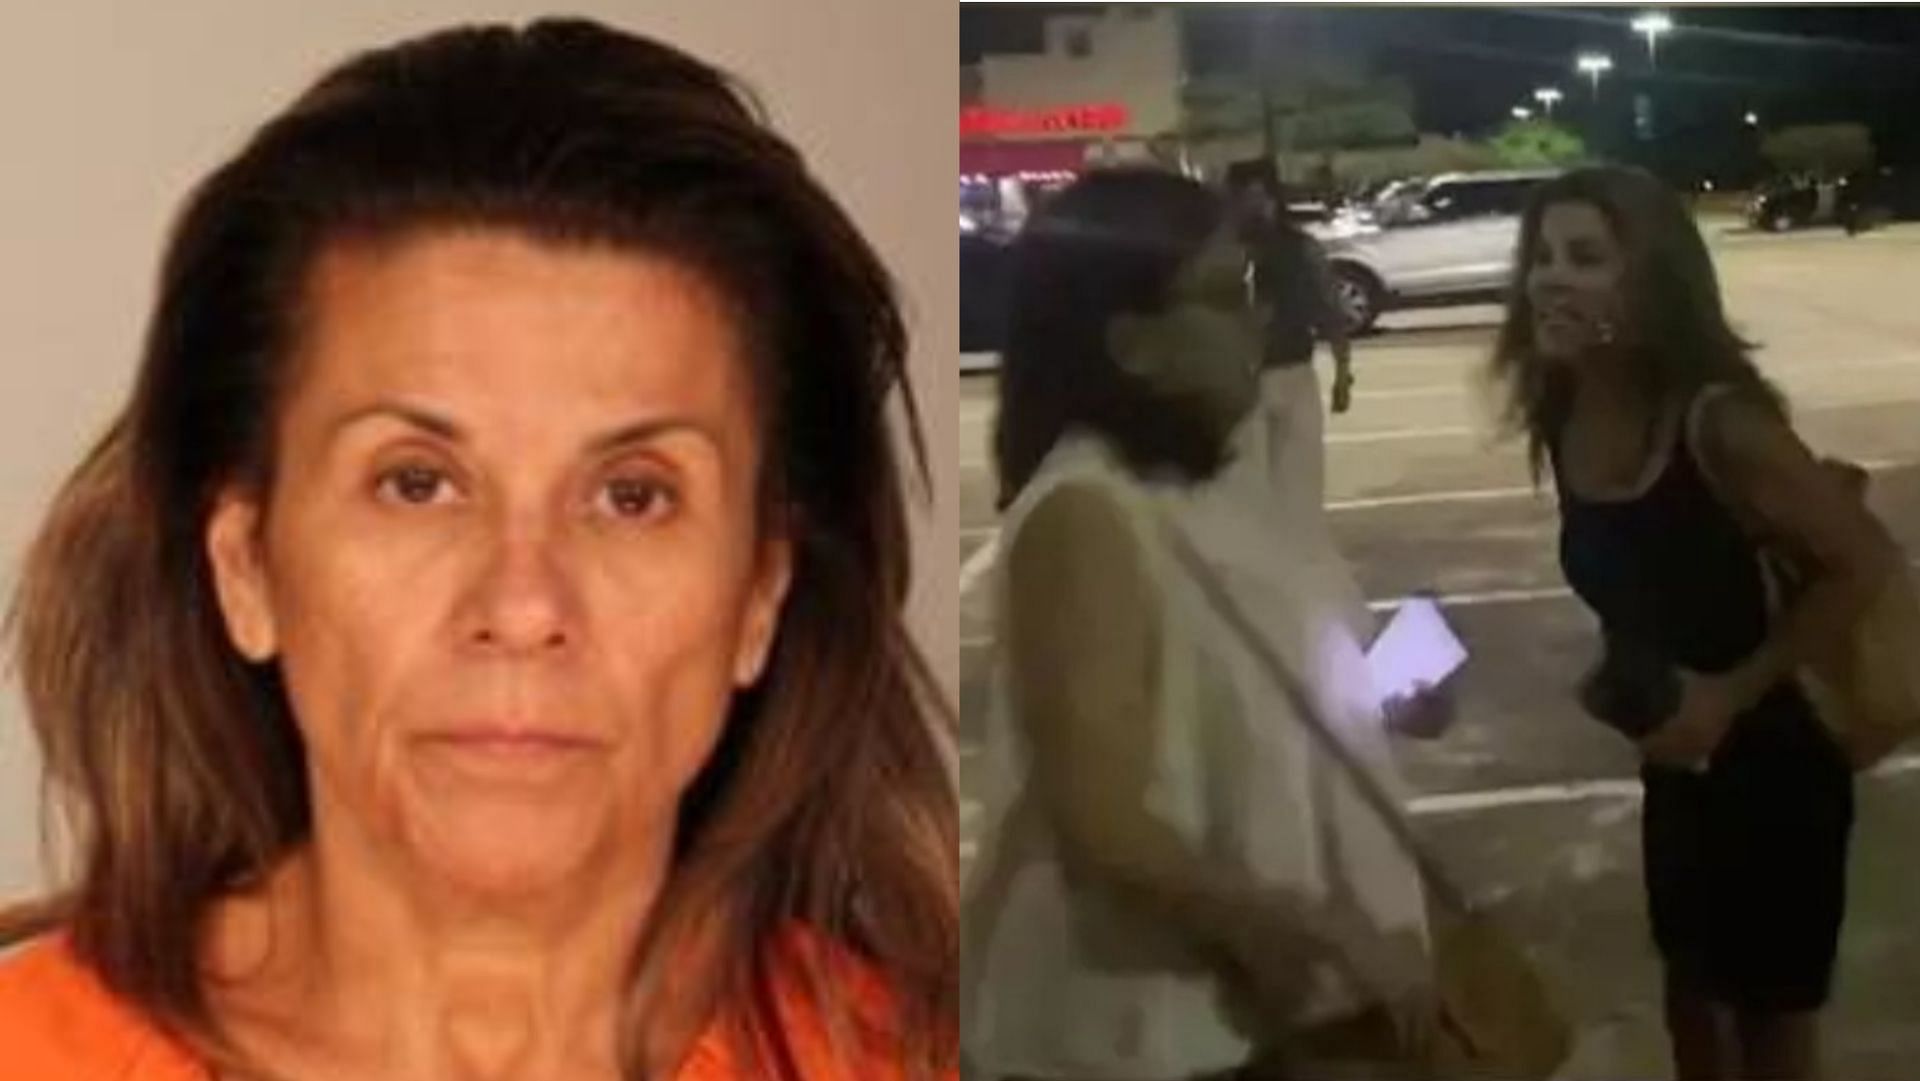 Esmeralda Upton physically and verbally assaulted four Indian-American women outside a restaurant. (Image via @OmarVillafranca/Twitter, @imAlter_ego/Twitter)